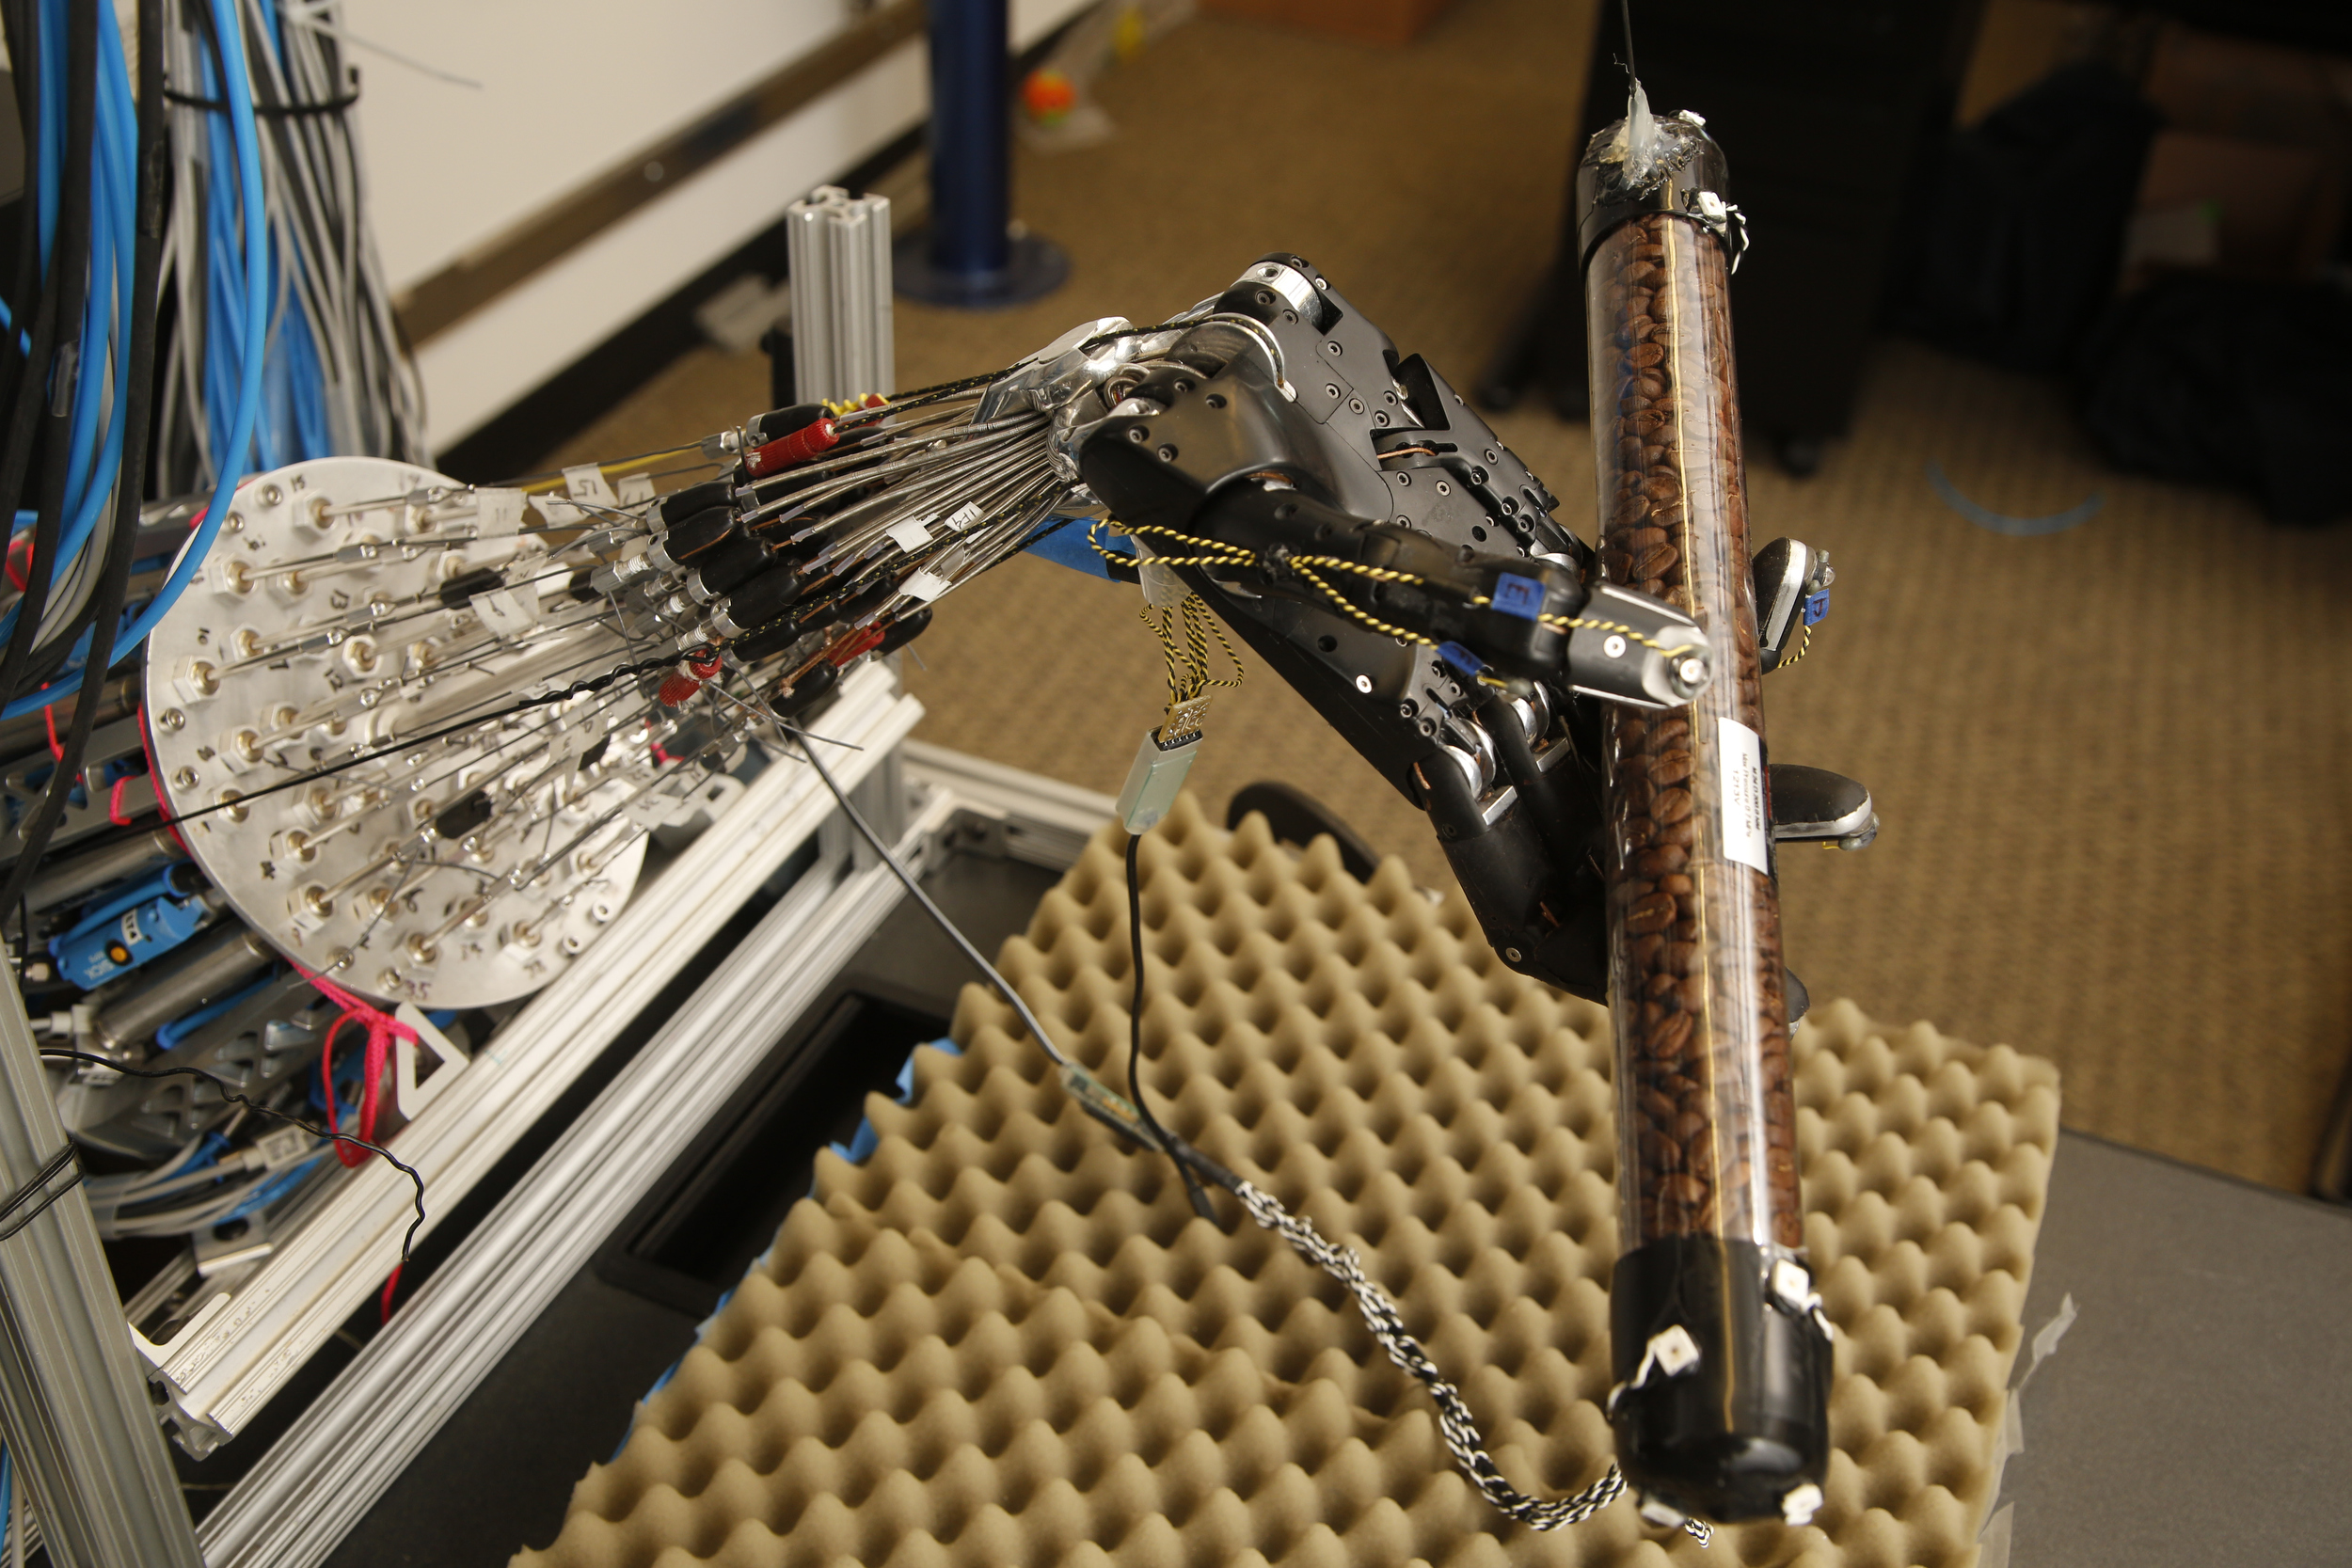 Machine learning model enables robotic hand to learn autonomously